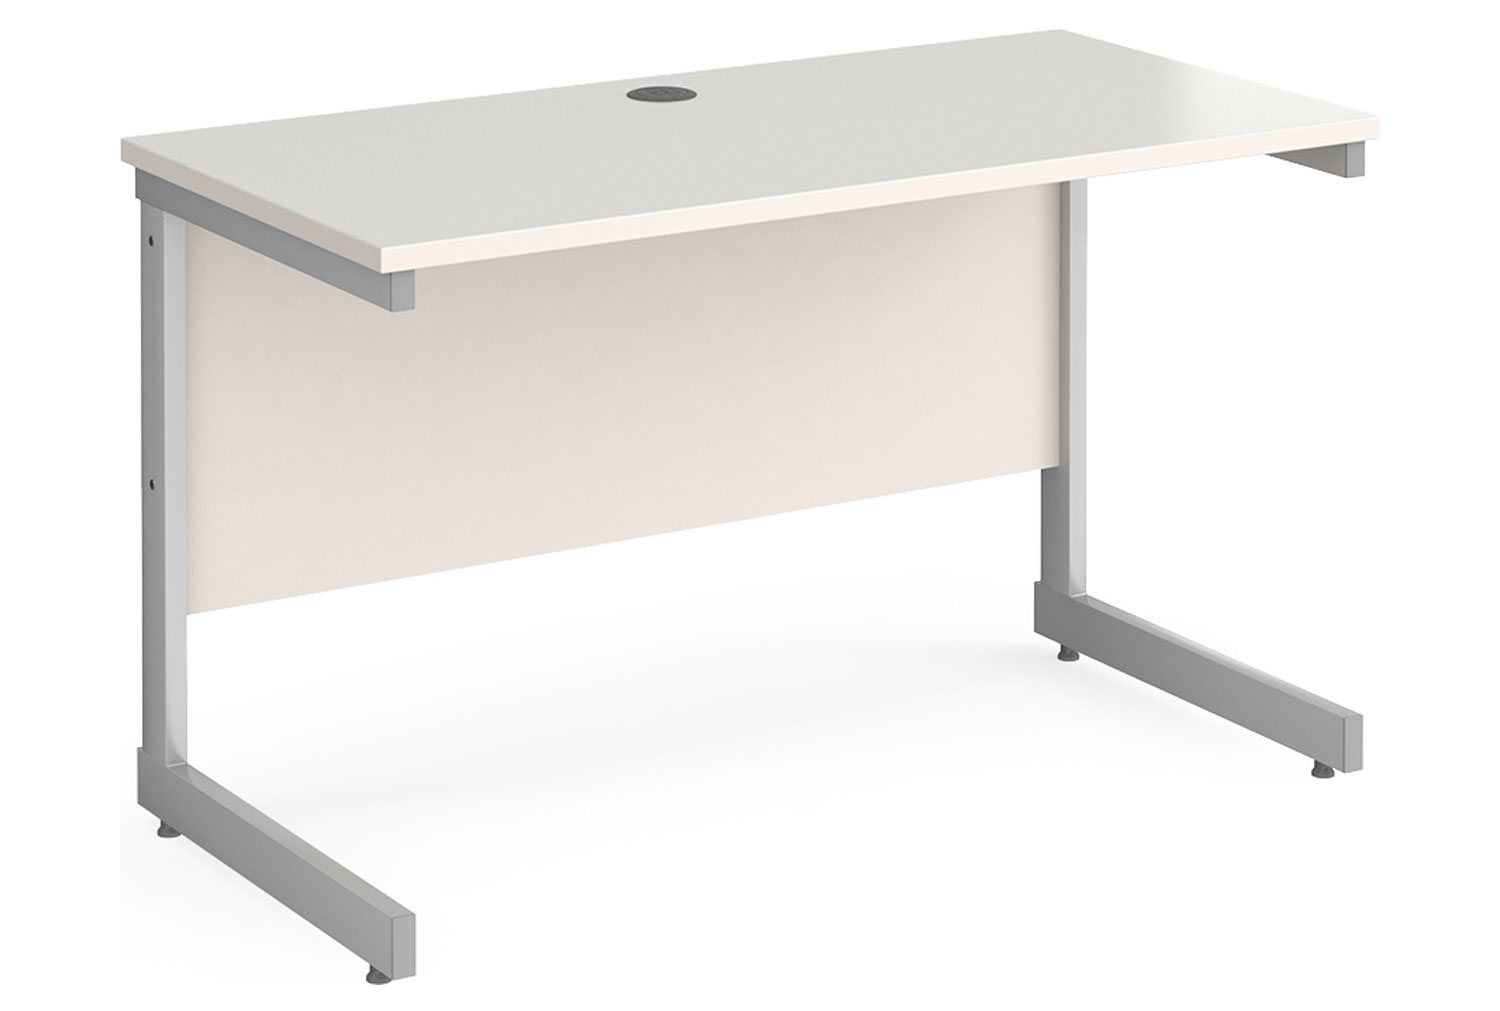 Thrifty Next-Day Narrow Rectangular Office Desk White, 120w60dx73h (cm), Express Delivery